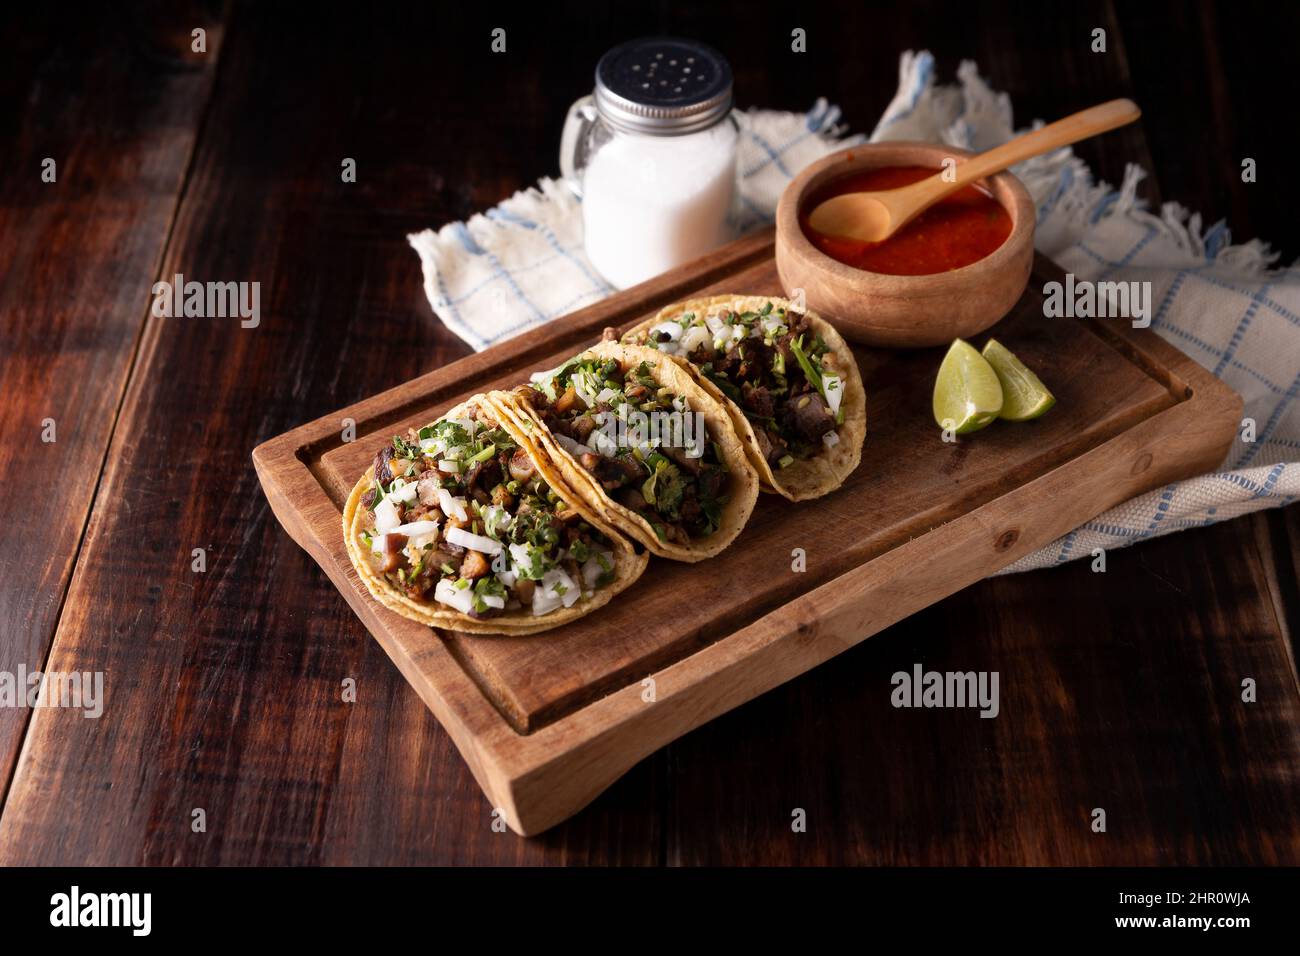 Tacos de Suadero. Fried meat in a corn tortilla. Street food from CDMX, Mexico, traditionally accompanied with cilantro, onion and spicy red sauce Stock Photo